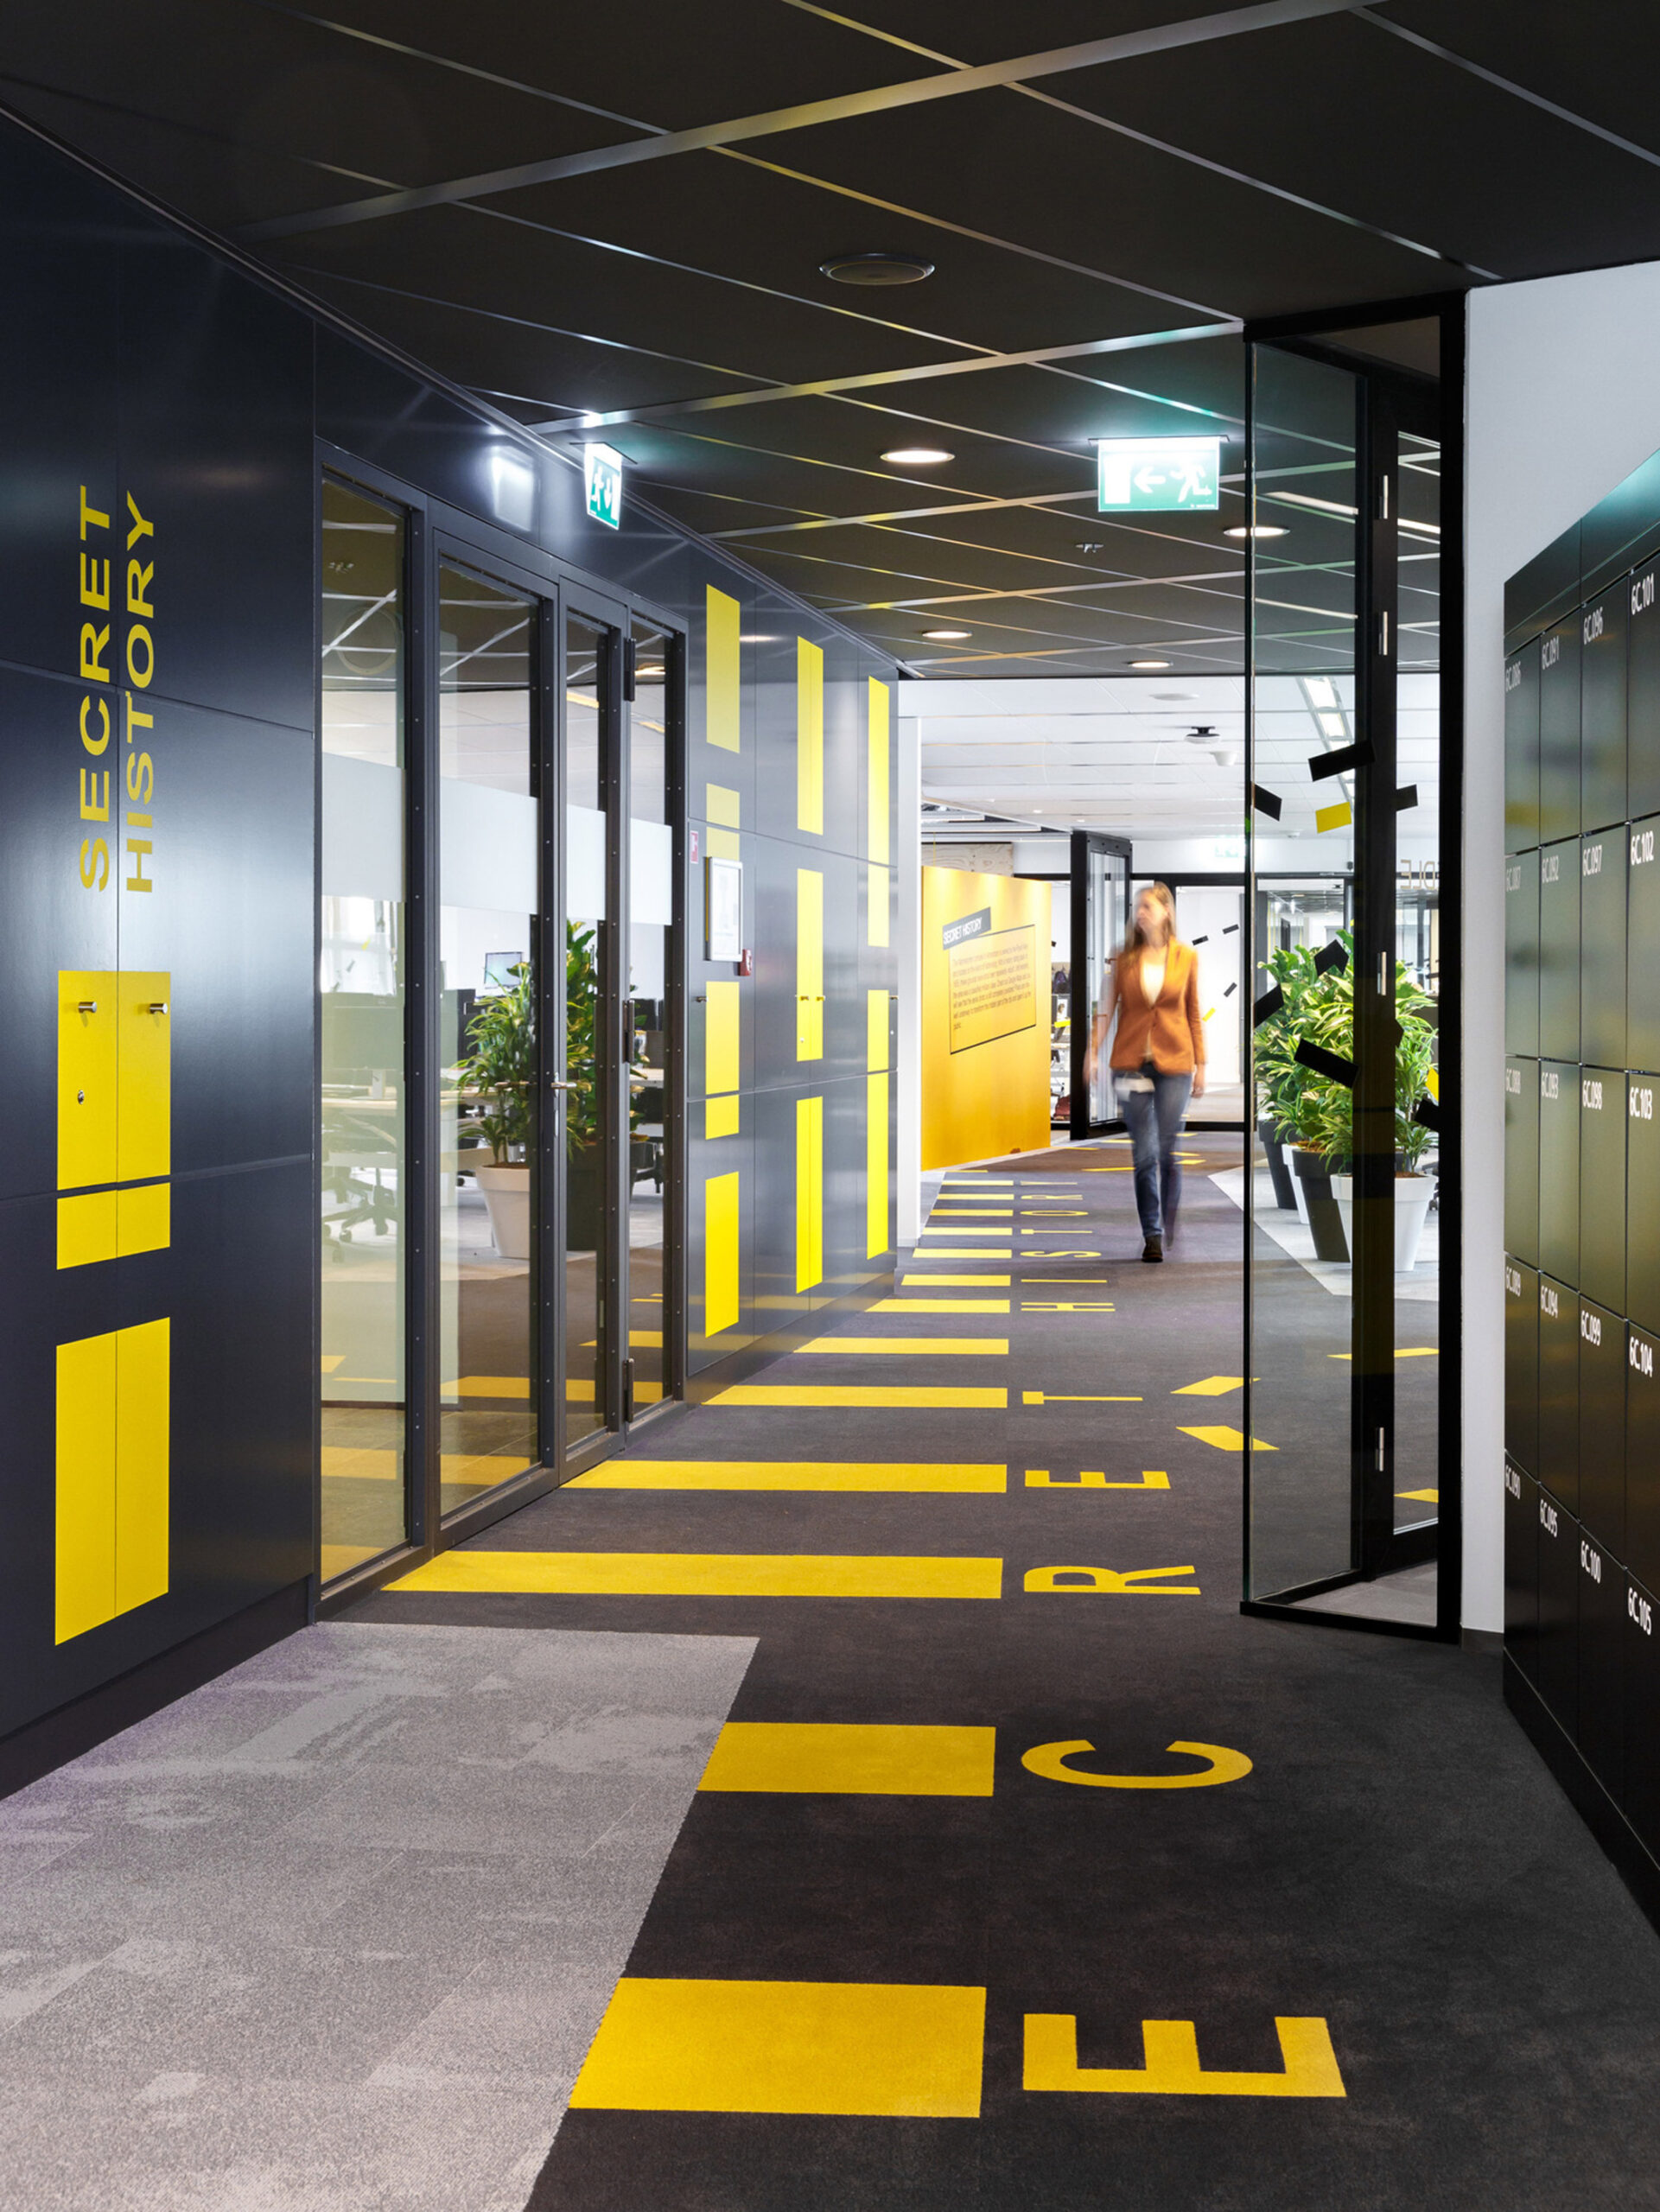 Sleek office corridor with bold yellow graphic elements on a gray floor, accentuating directional flow and zone demarcations, complemented by dynamic lighting and clear signage for a modern, energetic workplace environment.